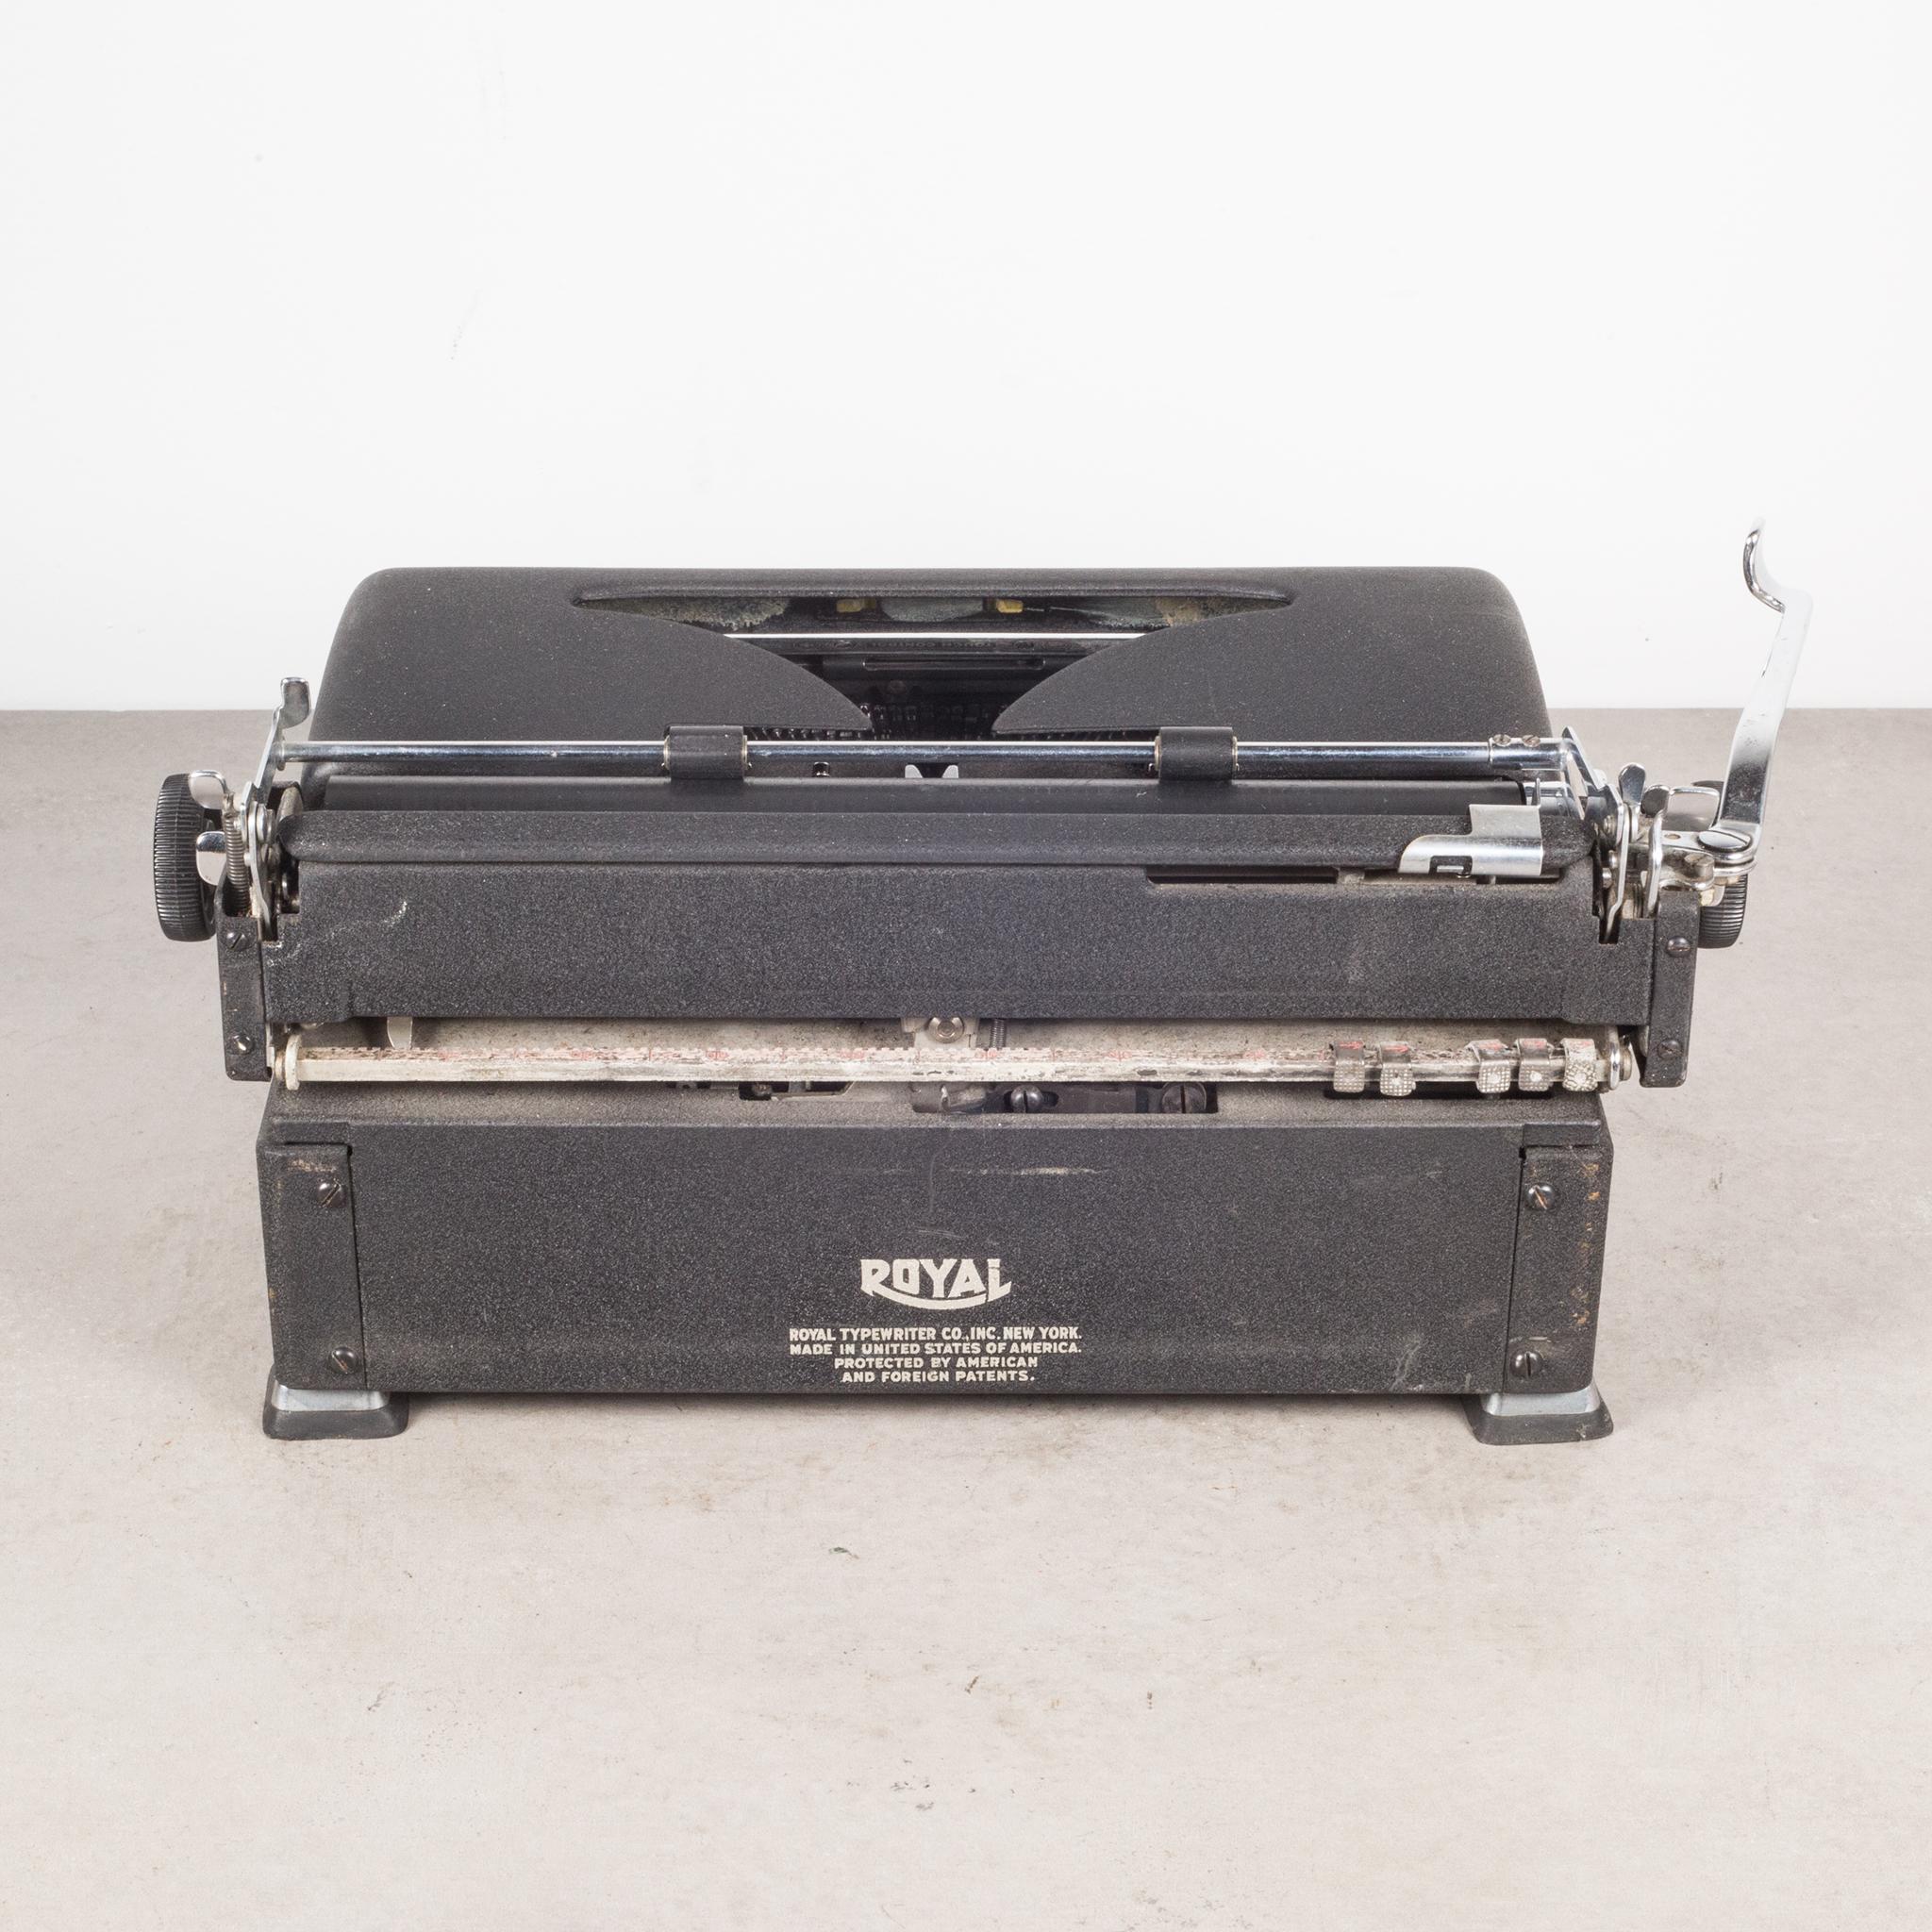 Art Deco Fully Refurbished Royal Quiet DeLuxe Typewriter with Black Crinkle Finish c.1939